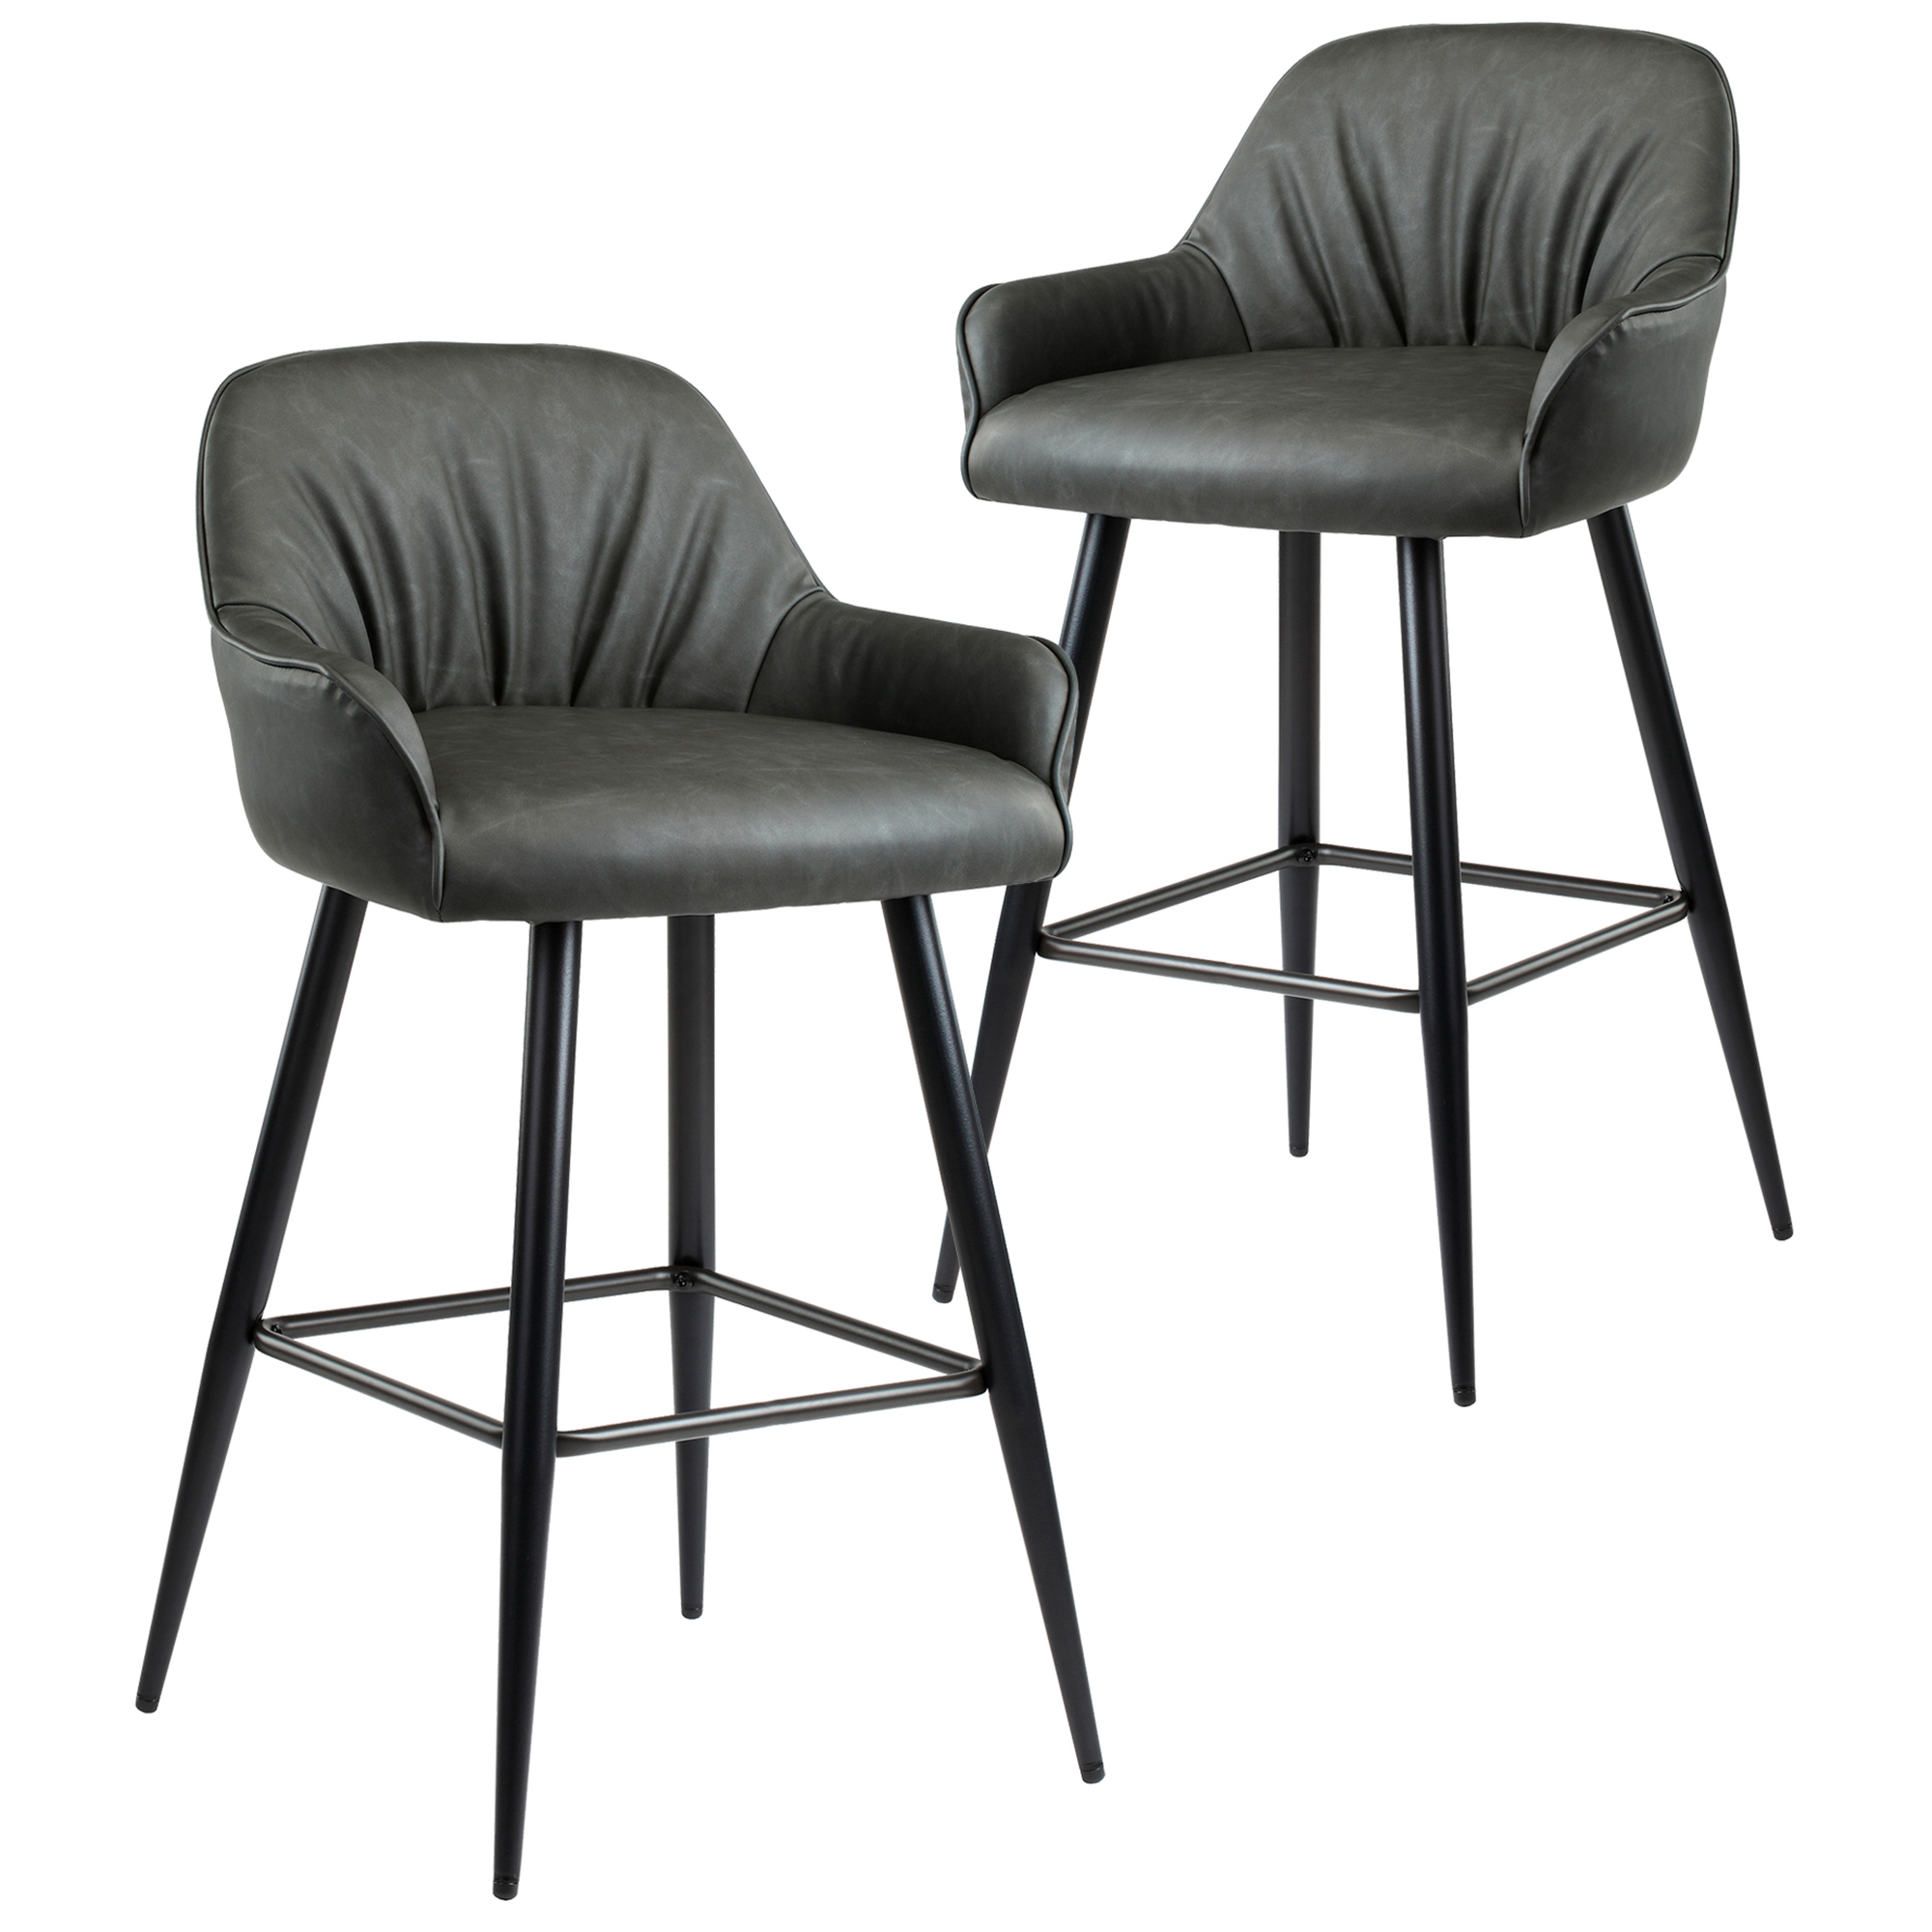 Dark Grey Ruche Faux Leather Counter Stools, Faux Leather Counter Stools